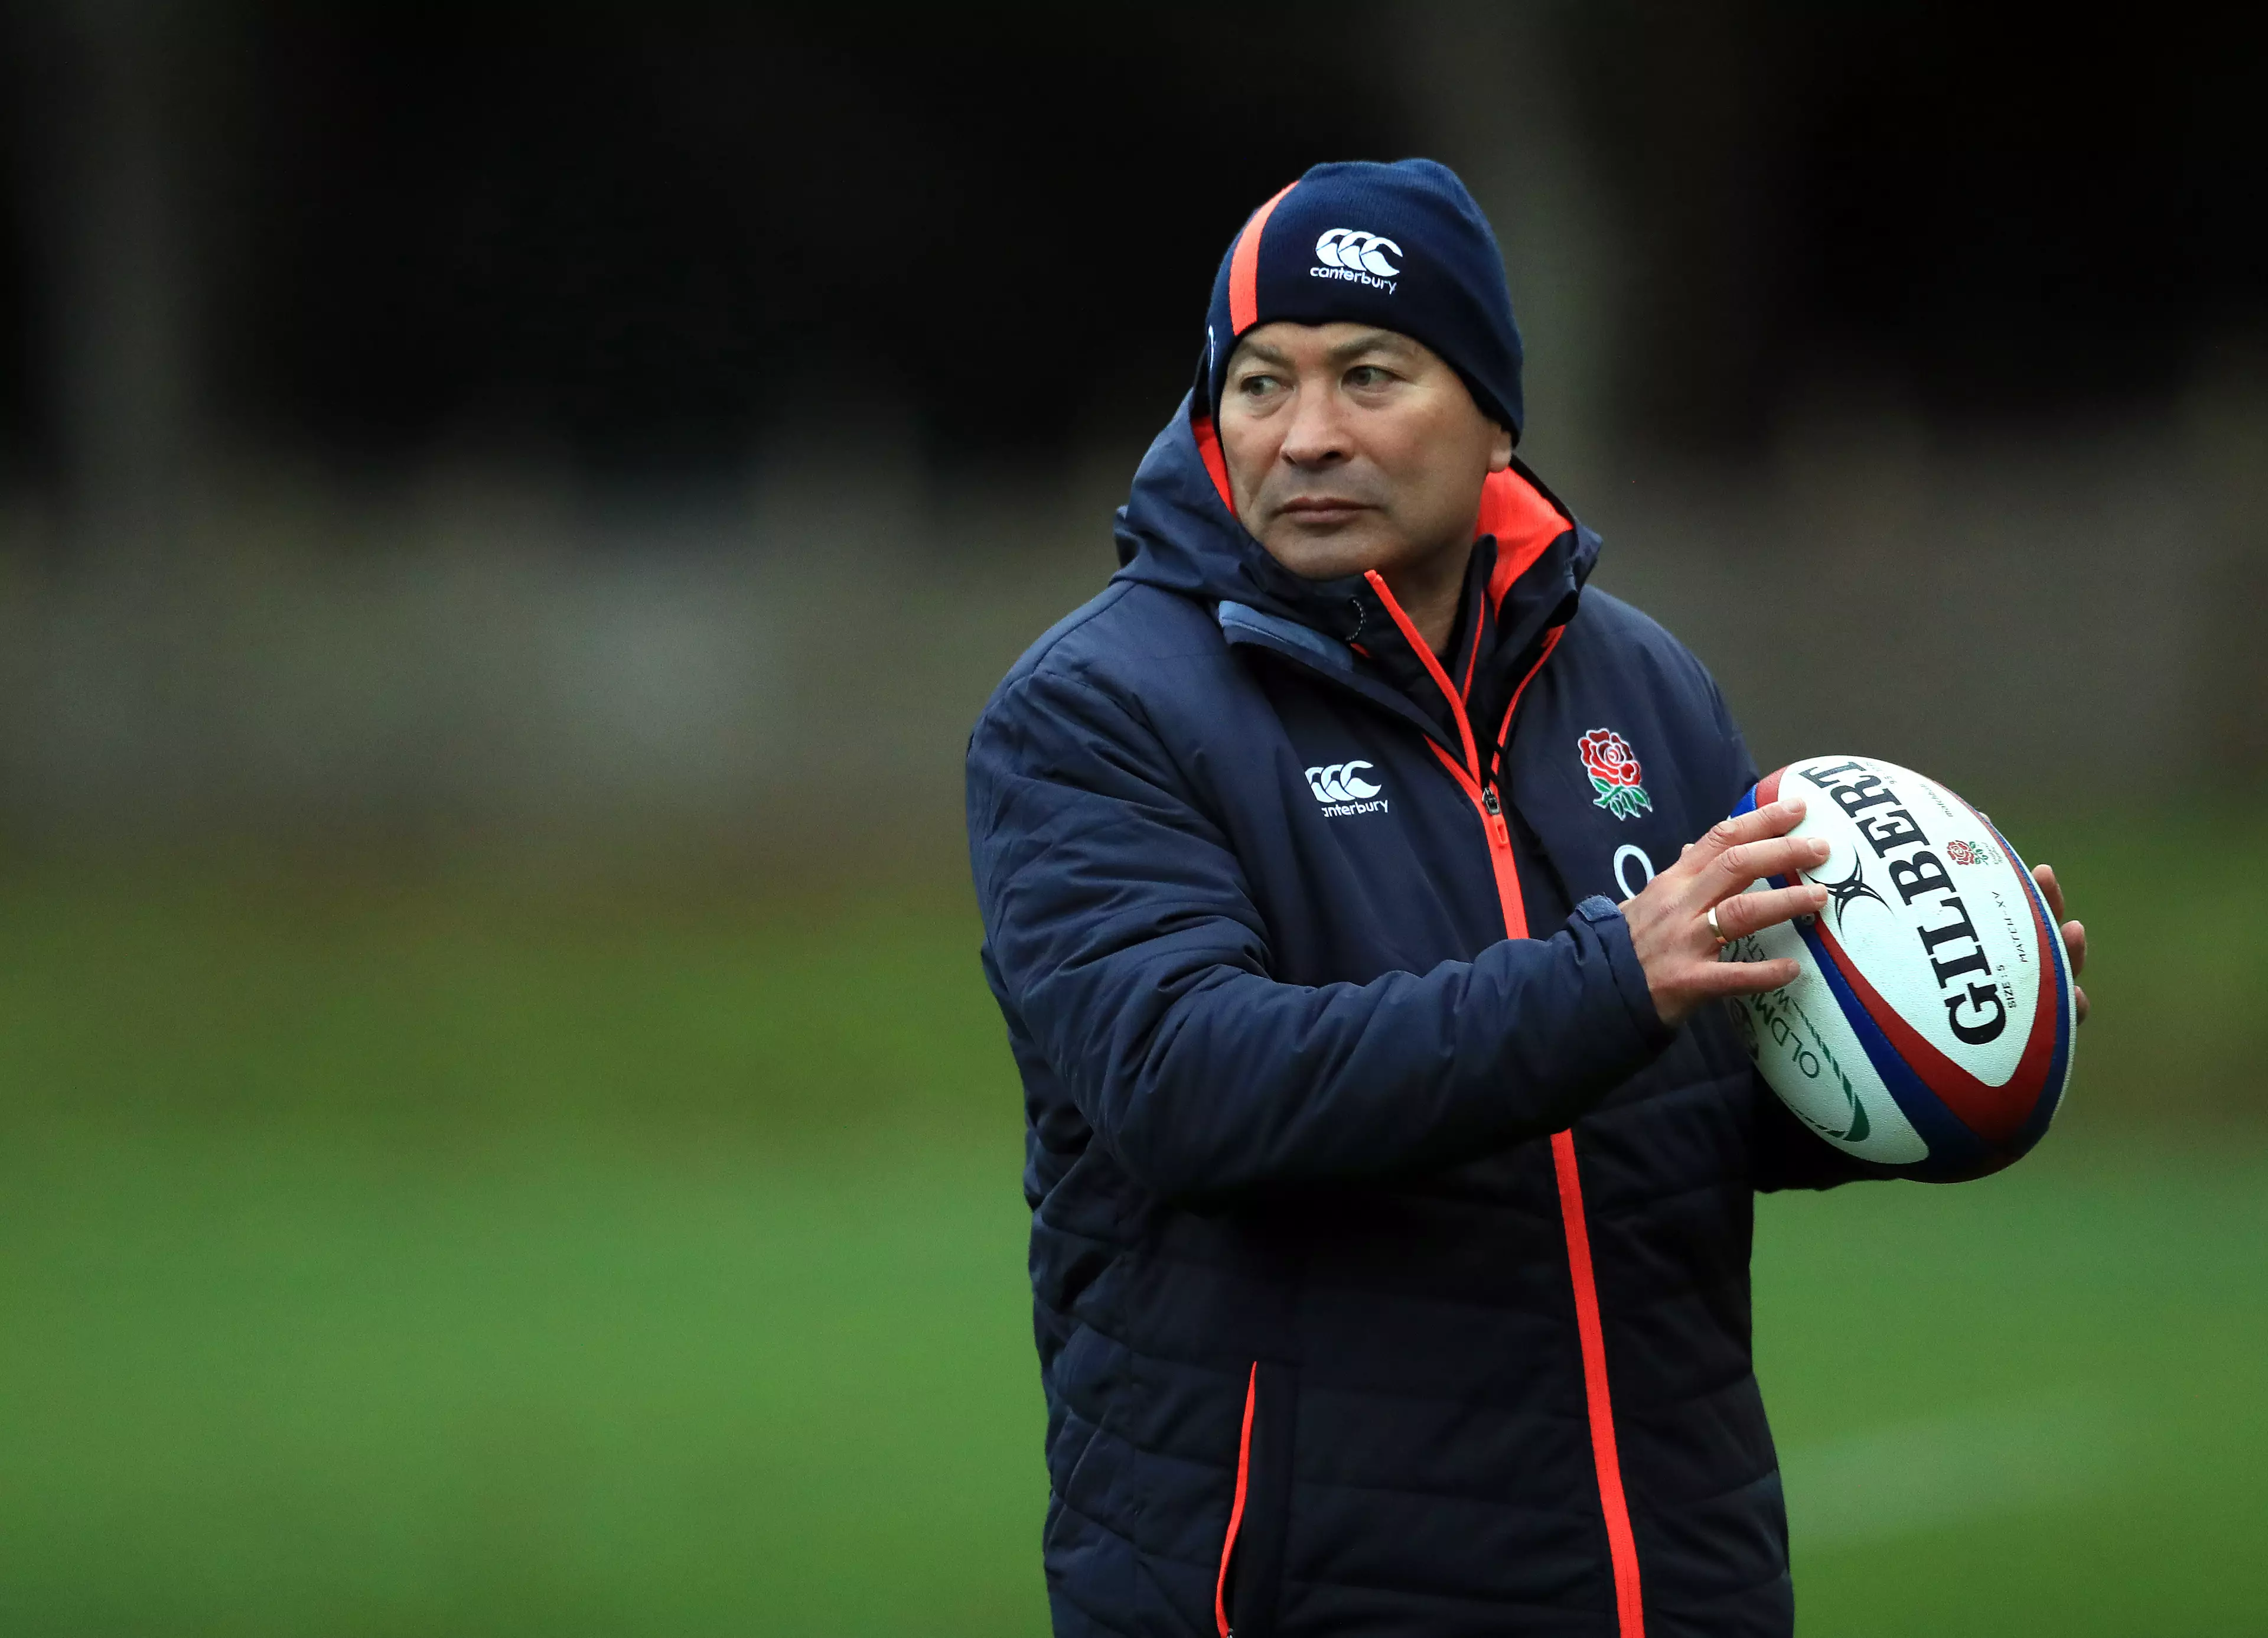 Eddie Jones Side Could Finish 2016 Undefeated Even With Injury Crisis